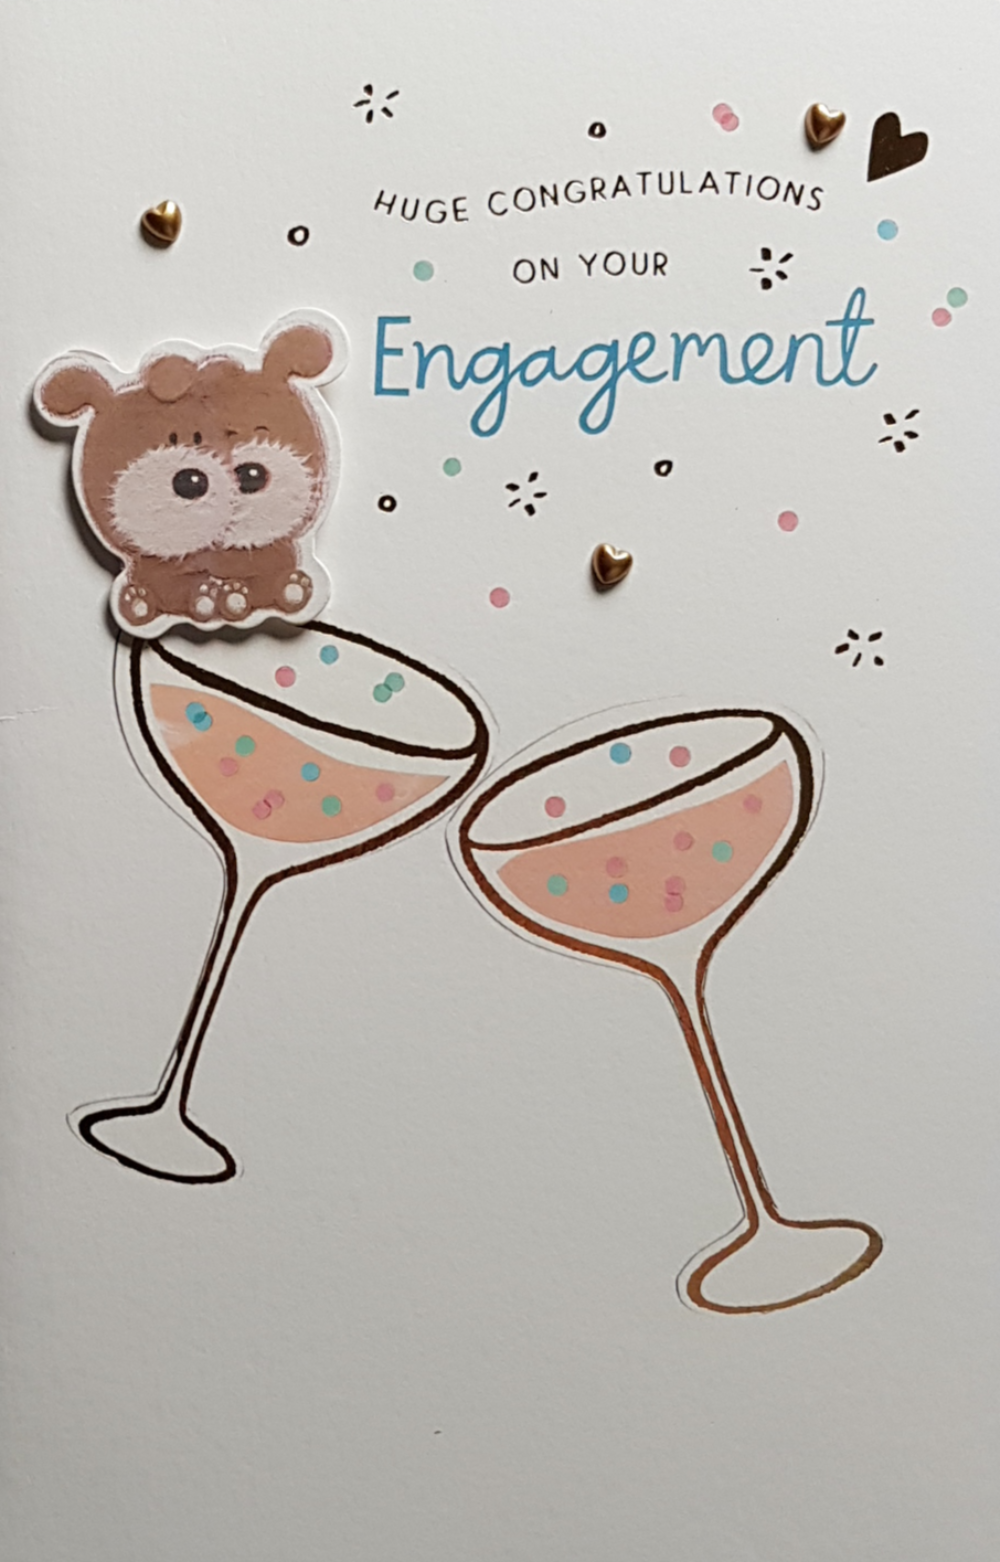 Engagement Card - Huge Congratulations & Two Bears Sitting On Clinking Wine Glasses